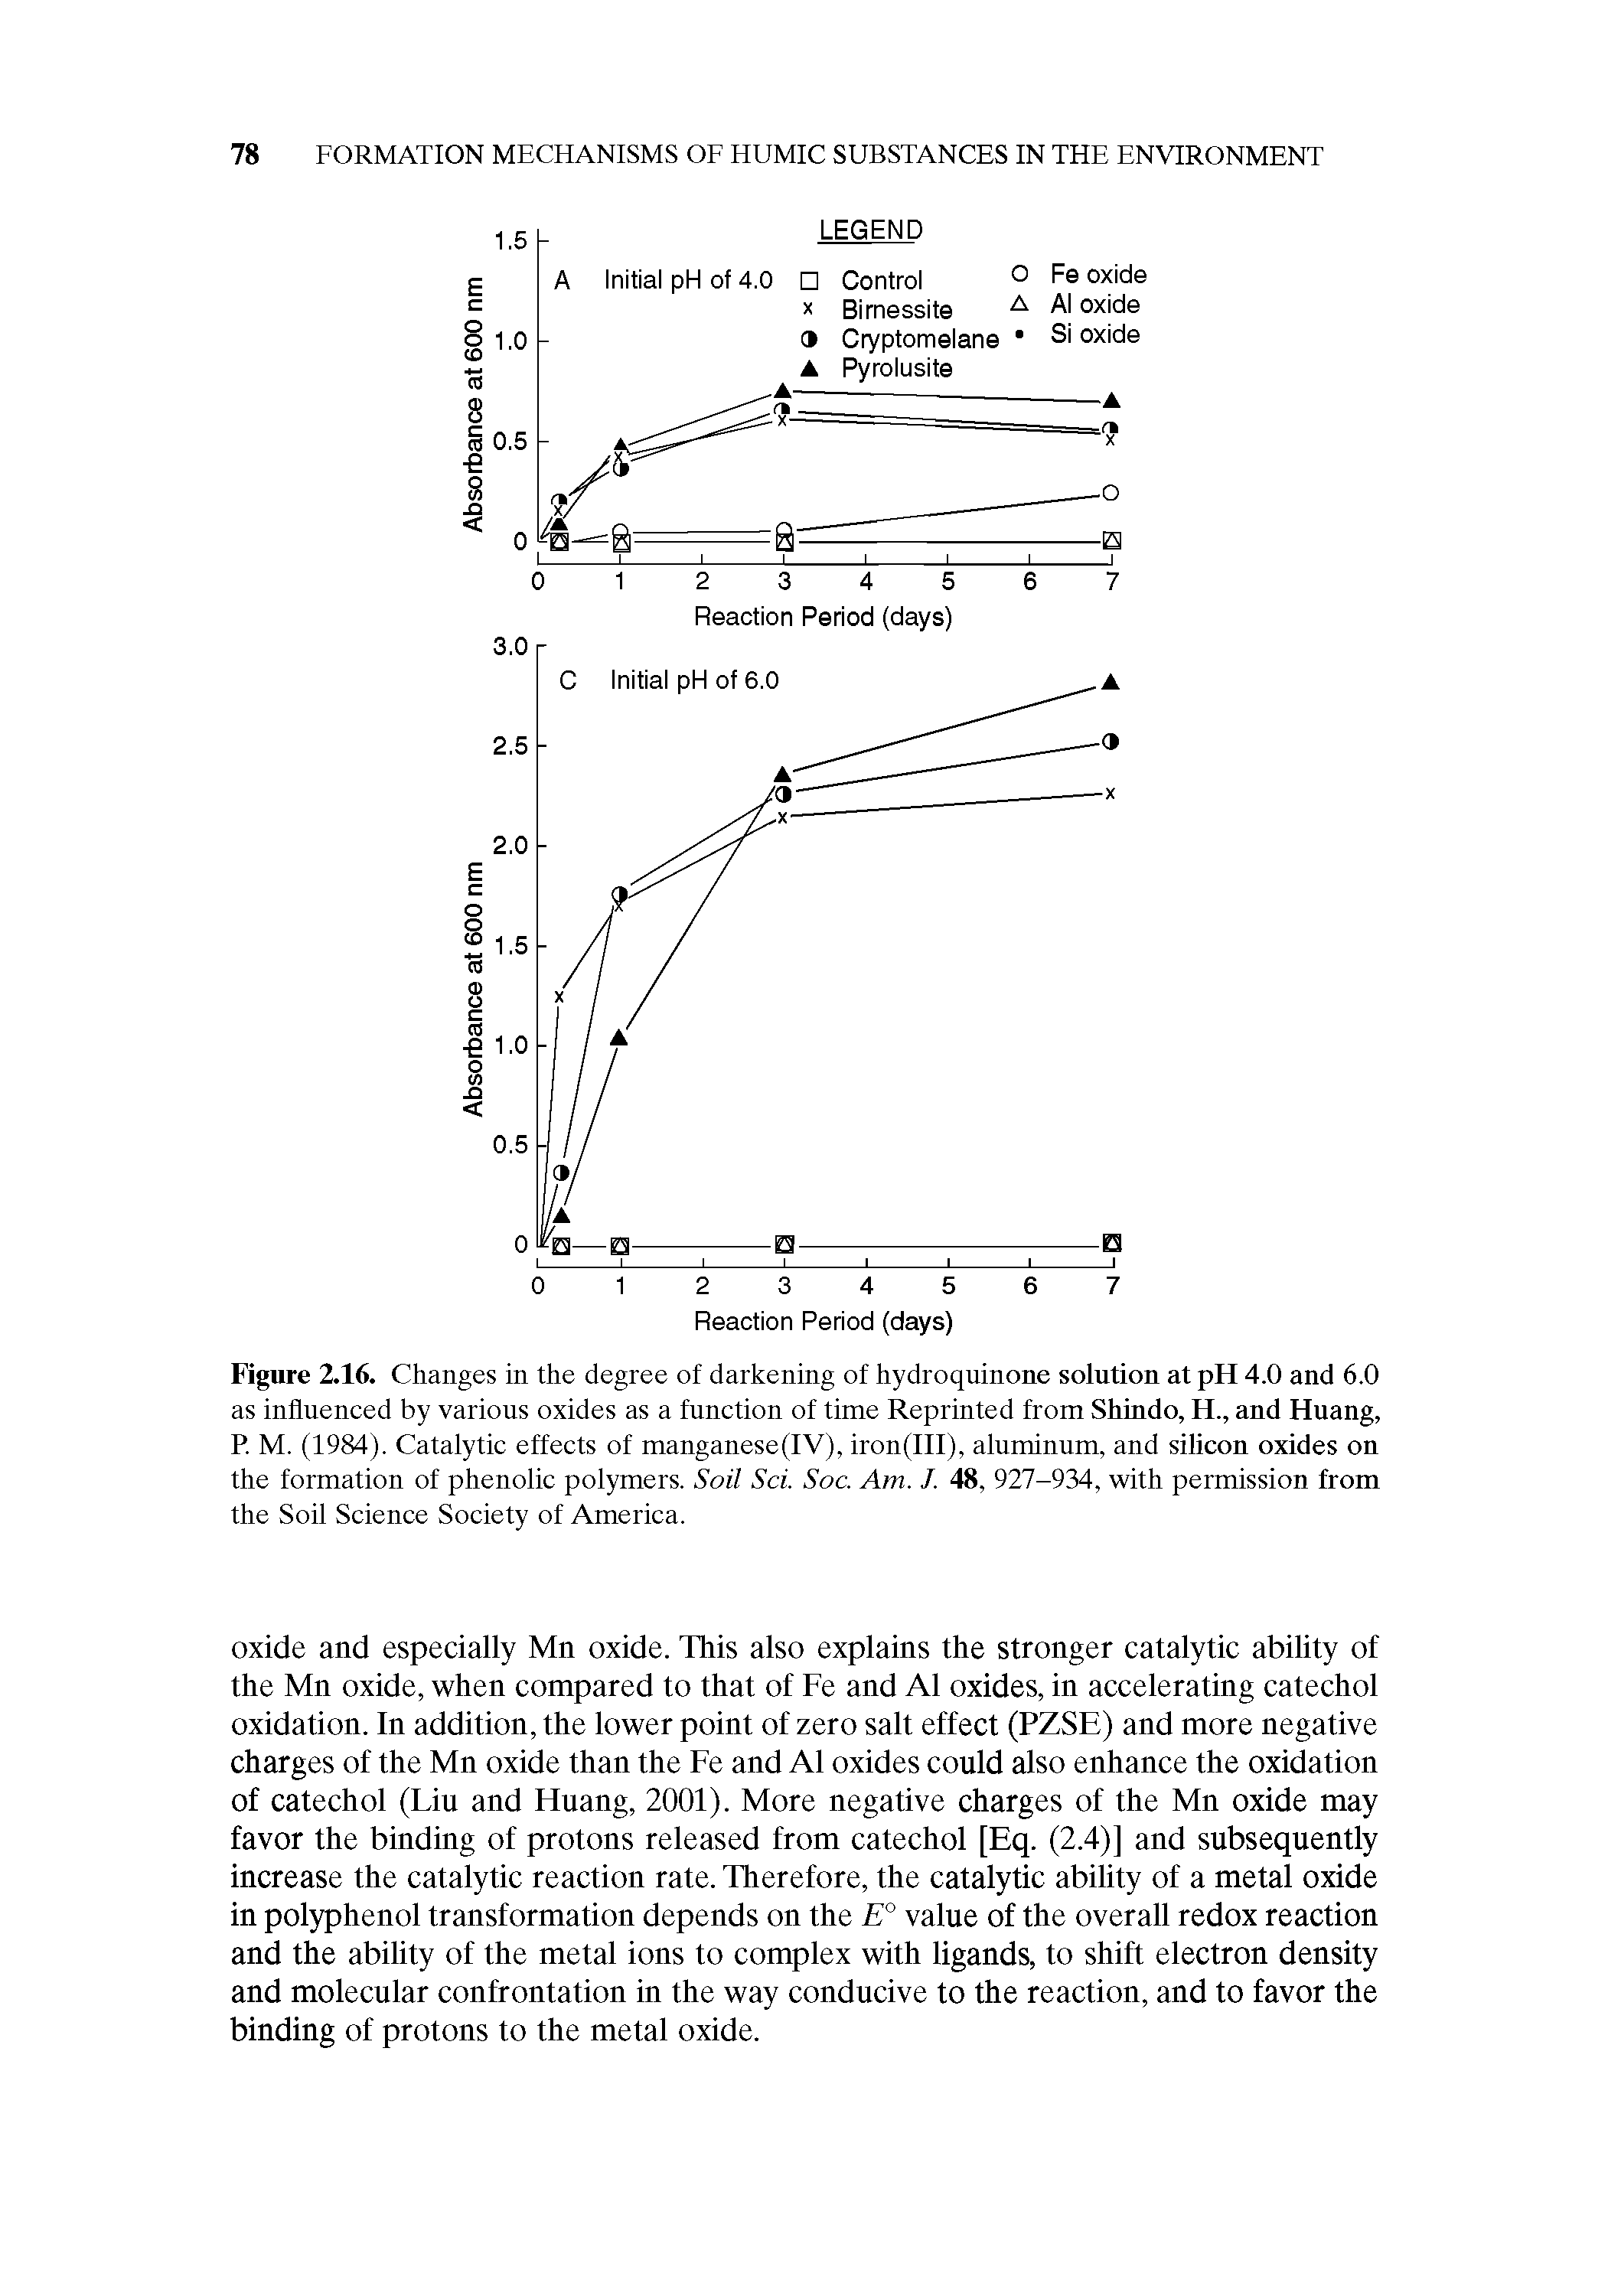 Figure 2.16. Changes in the degree of darkening of hydroquinone solution at pH 4.0 and 6.0 as influenced by various oxides as a function of time Reprinted from Shindo, H., and Huang, P. M. (1984). Catalytic effects of manganese(IV), iron(III), aluminum, and silicon oxides on the formation of phenolic polymers. Soil Sci. Soc. Am. J. 48, 927-934, with permission from the Soil Science Society of America.